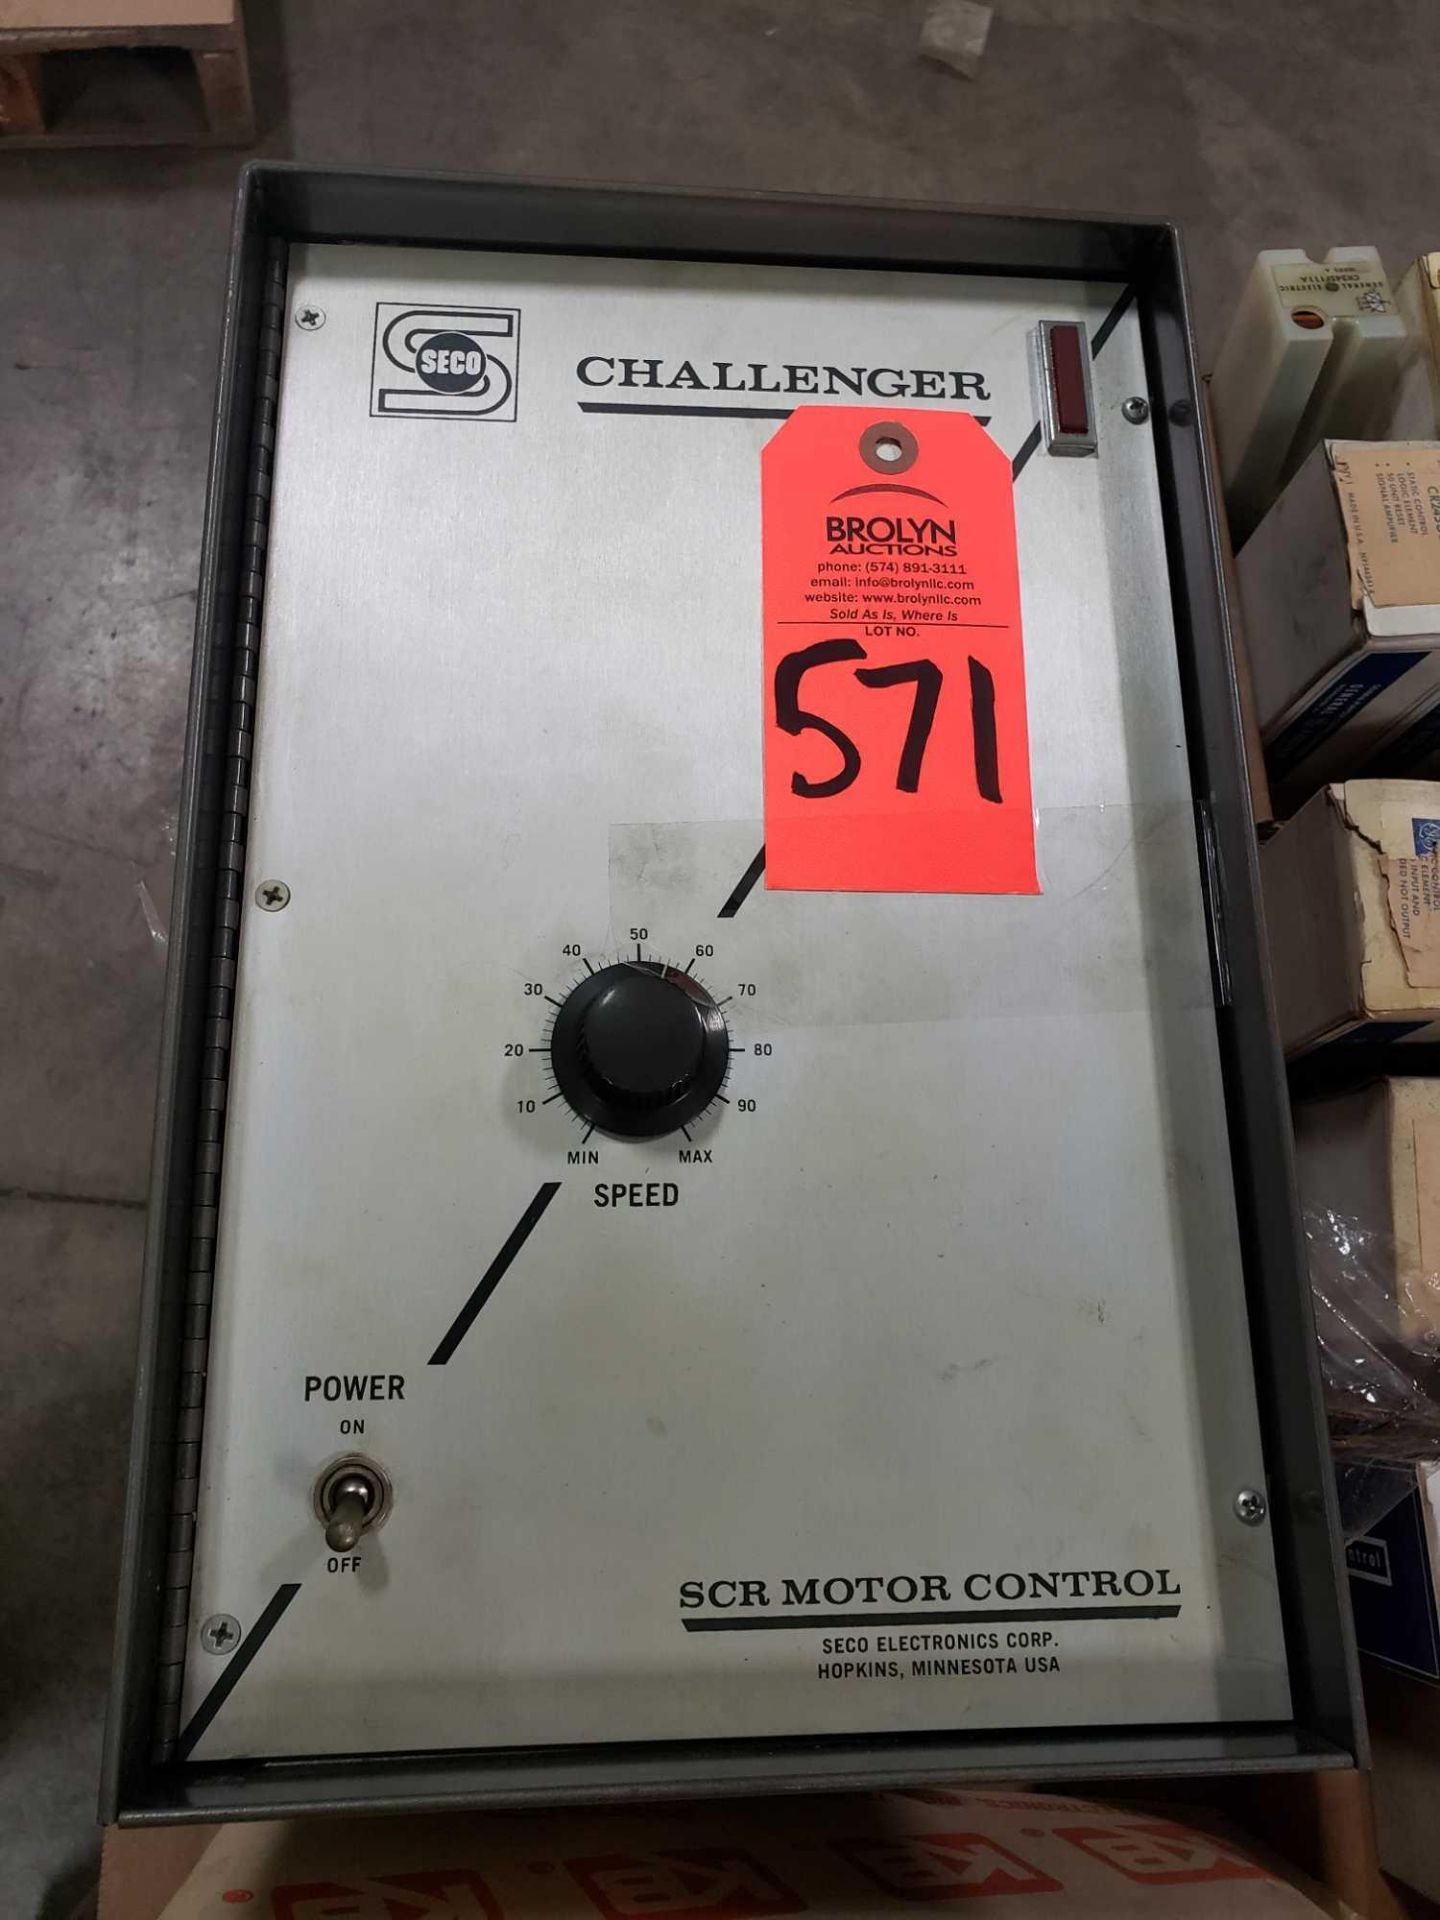 Seco Challenger 8500 SCR motor control part number 8501. New old stock with storage wear.